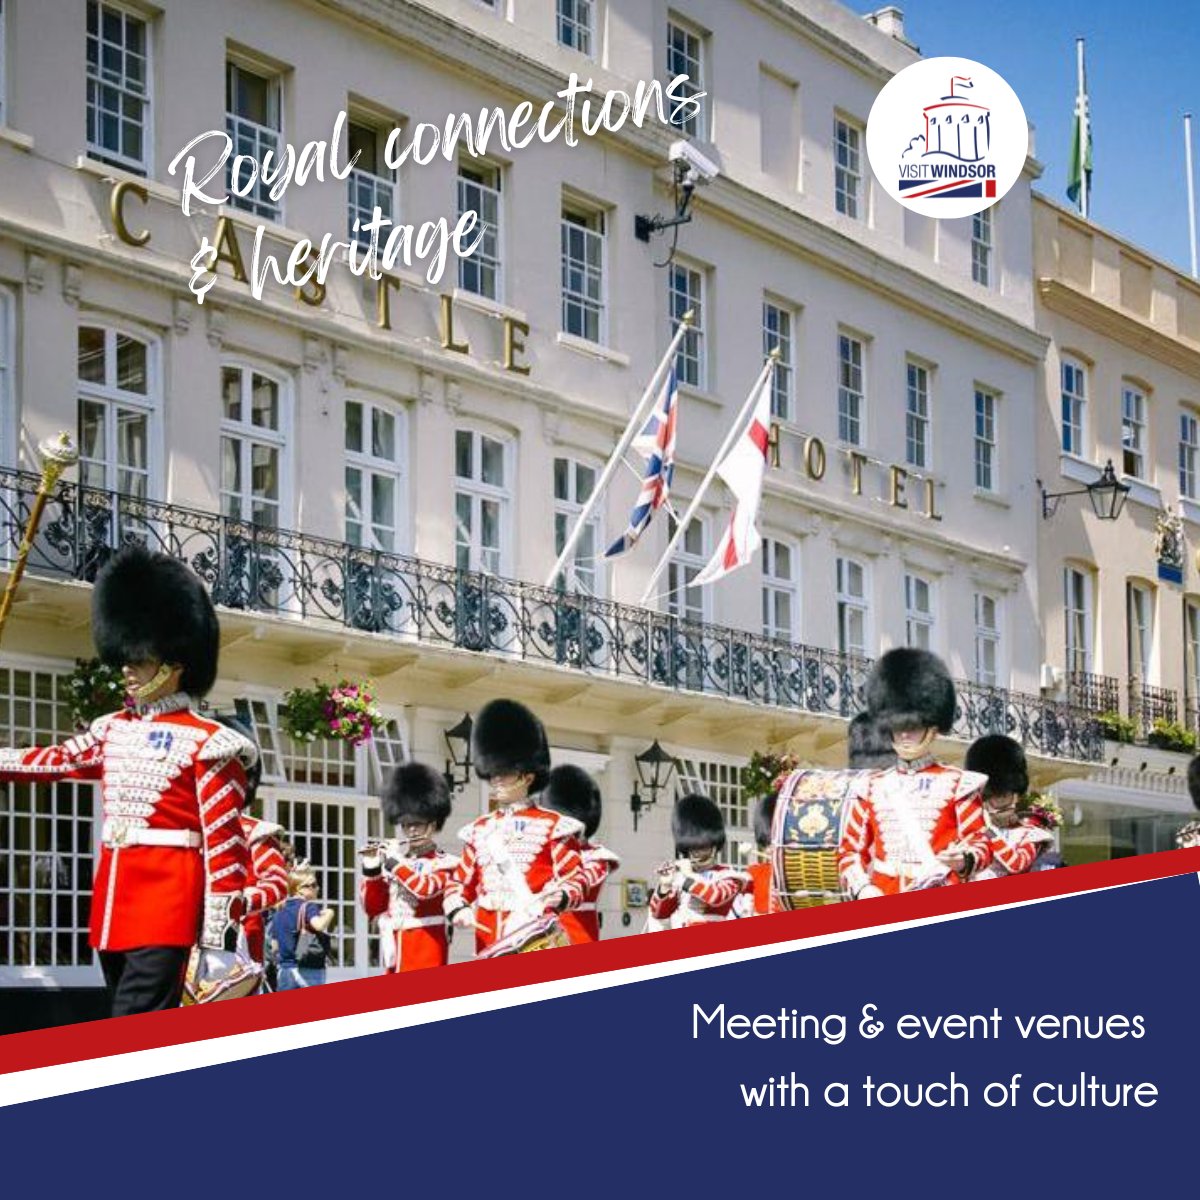 You can’t say the word 'Windsor' without conjuring up images of the world’s oldest & largest inhabited castle, world-class international events & stunning natural scenery.  Sign up to our e-news bit.ly/MICEenews #royalconnections #royalwindsor #eventprofs @MeetBeyondLDN